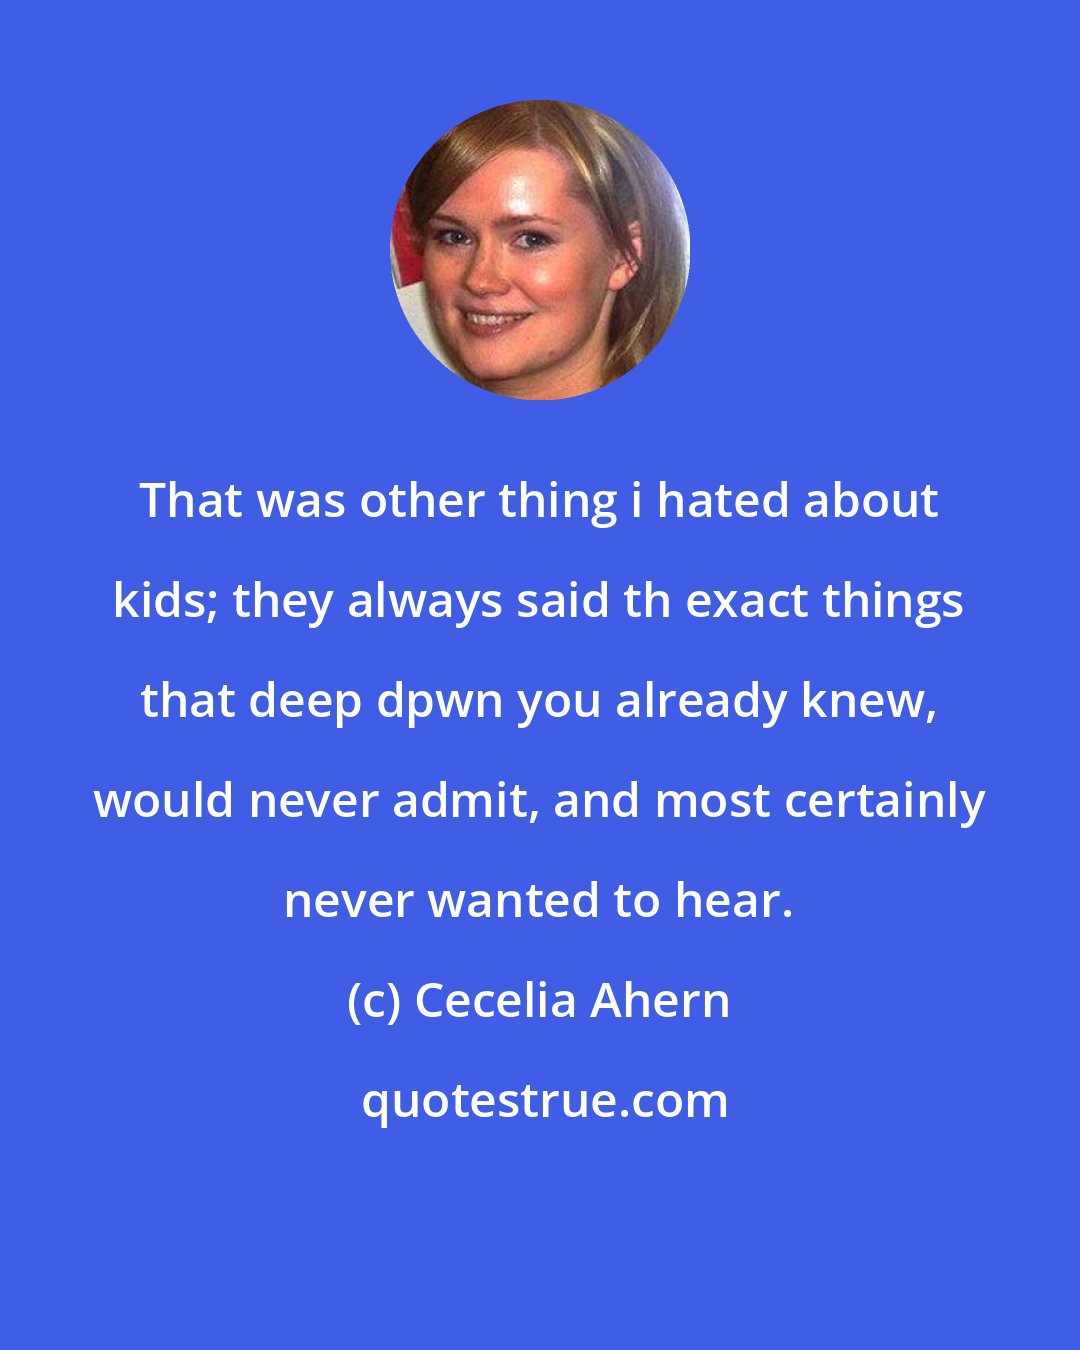 Cecelia Ahern: That was other thing i hated about kids; they always said th exact things that deep dpwn you already knew, would never admit, and most certainly never wanted to hear.